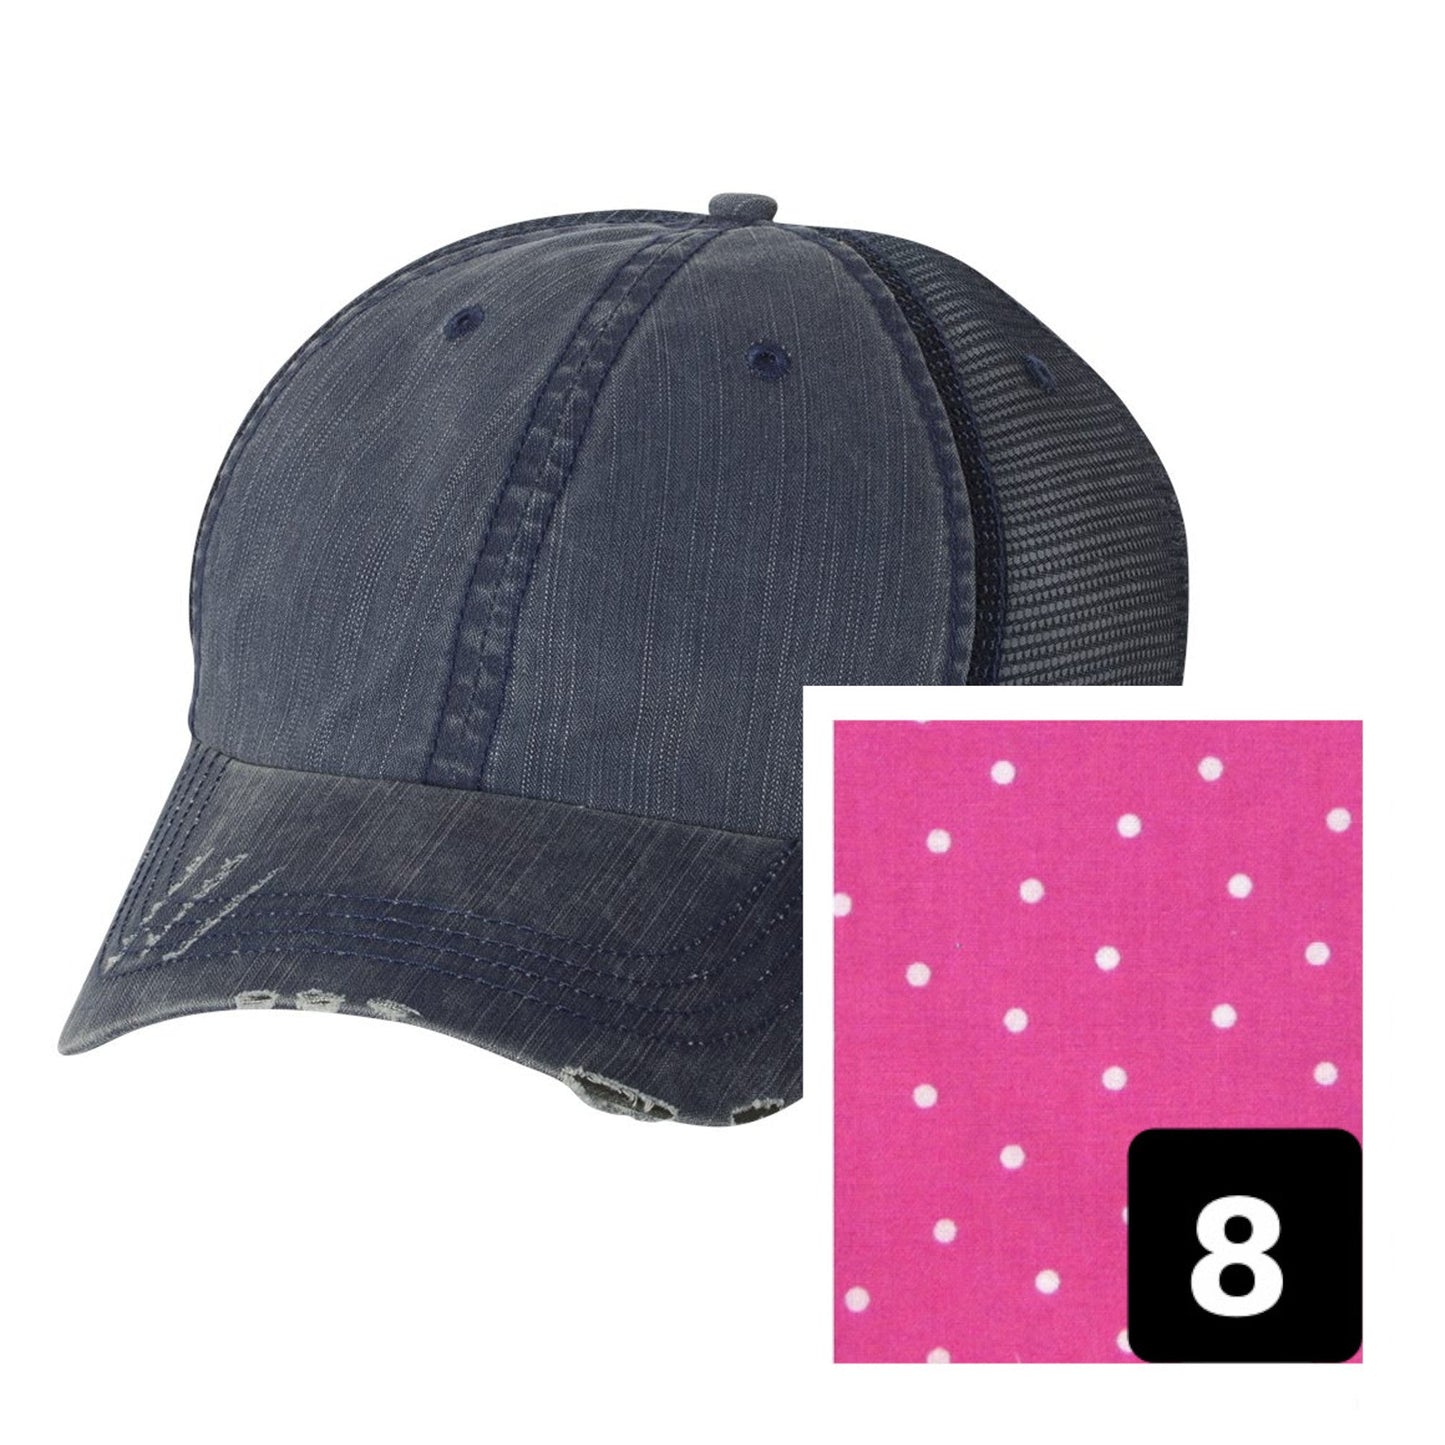 Rhode Island Hat | Navy Distressed Trucker Cap | Many Fabric Choices